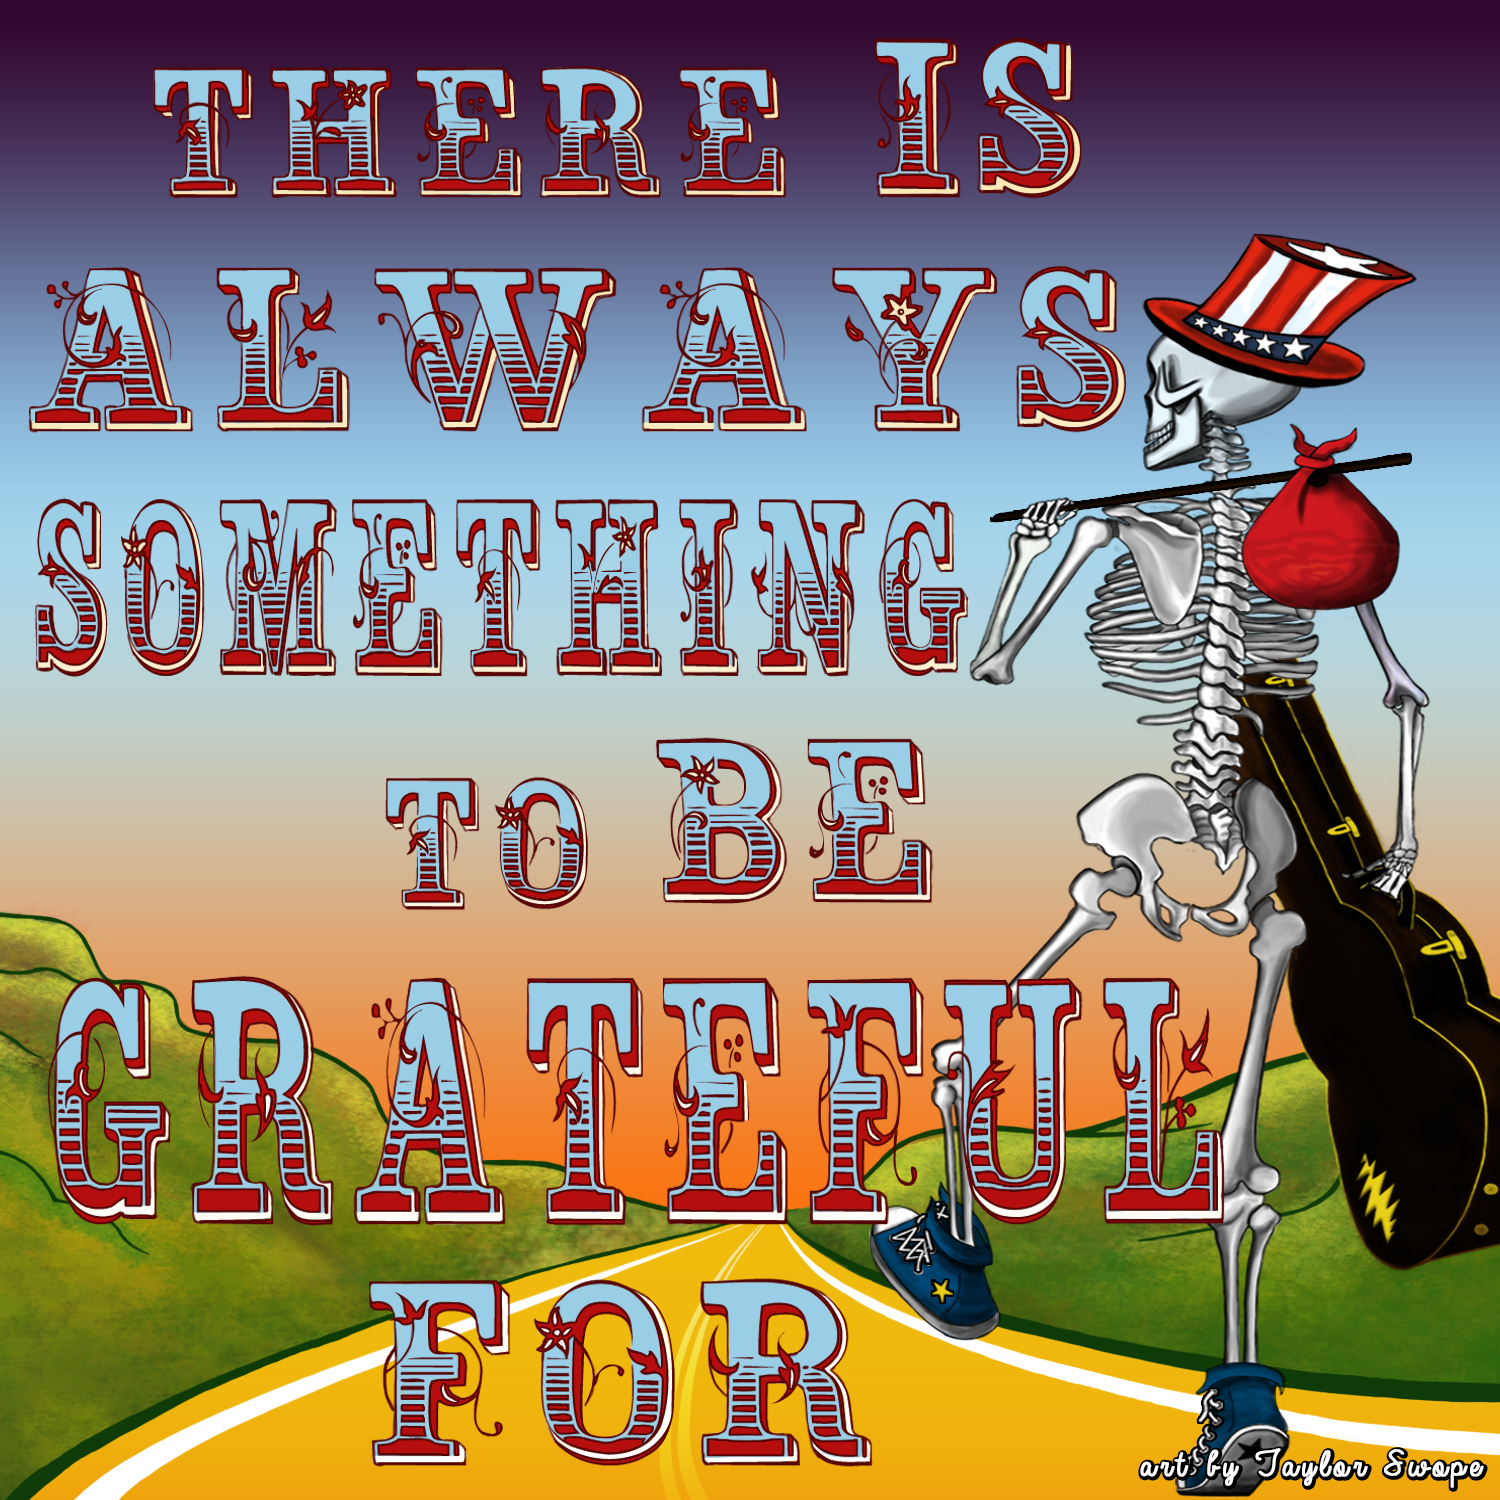 There’s always something to be grateful for!